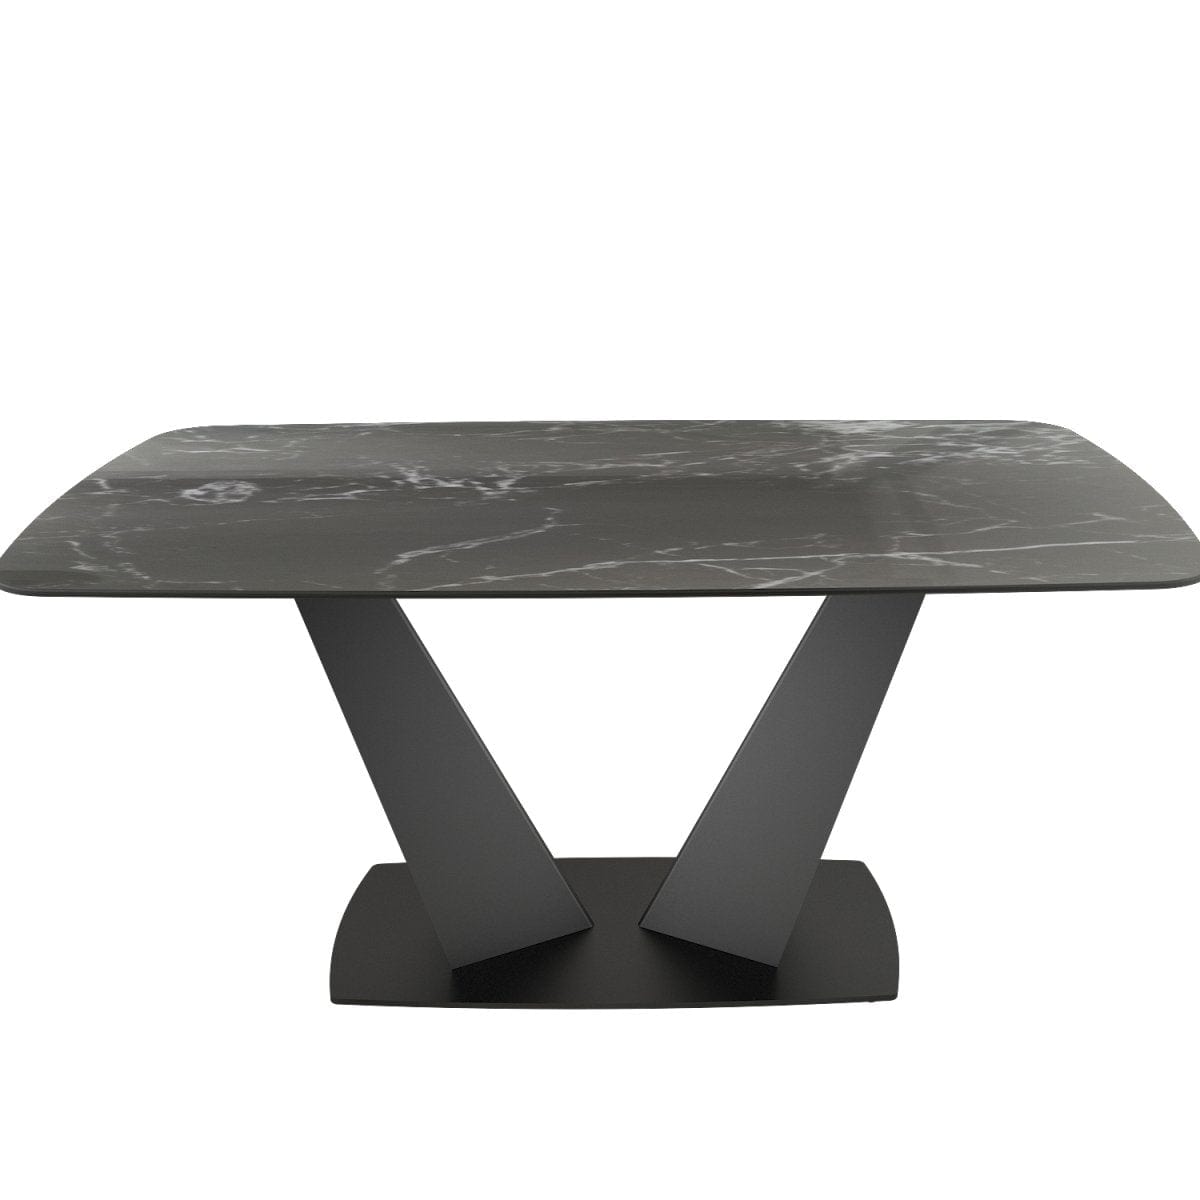 Gary 1.6m Sintered Stone Top Dining Table (V-Leg) (DF197-2T) picket and rail